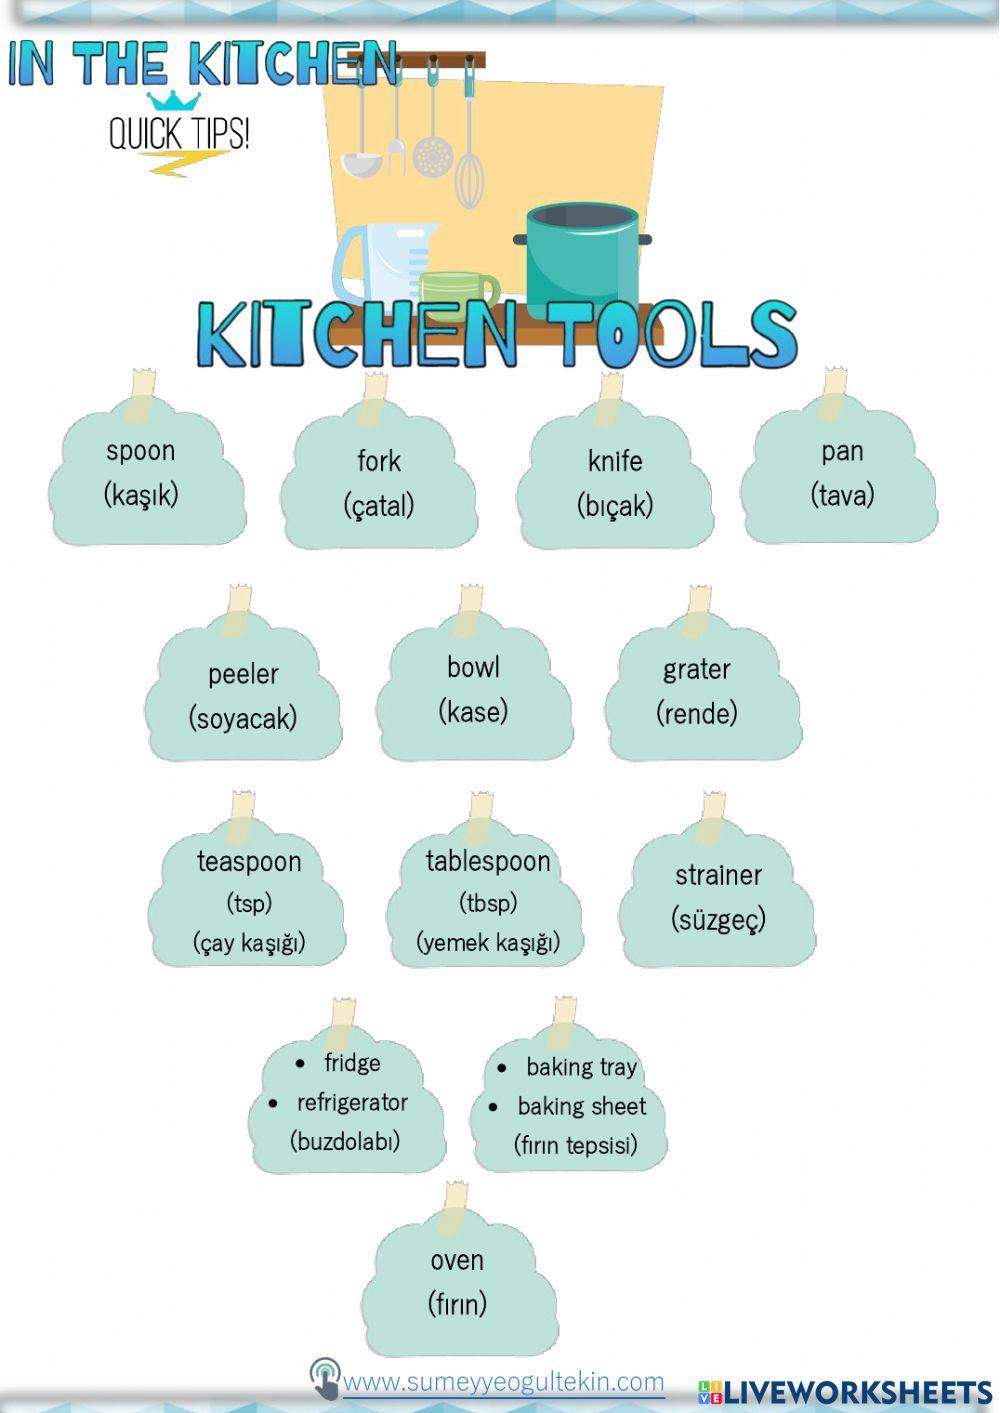 8.3 in the kitchen quick tips